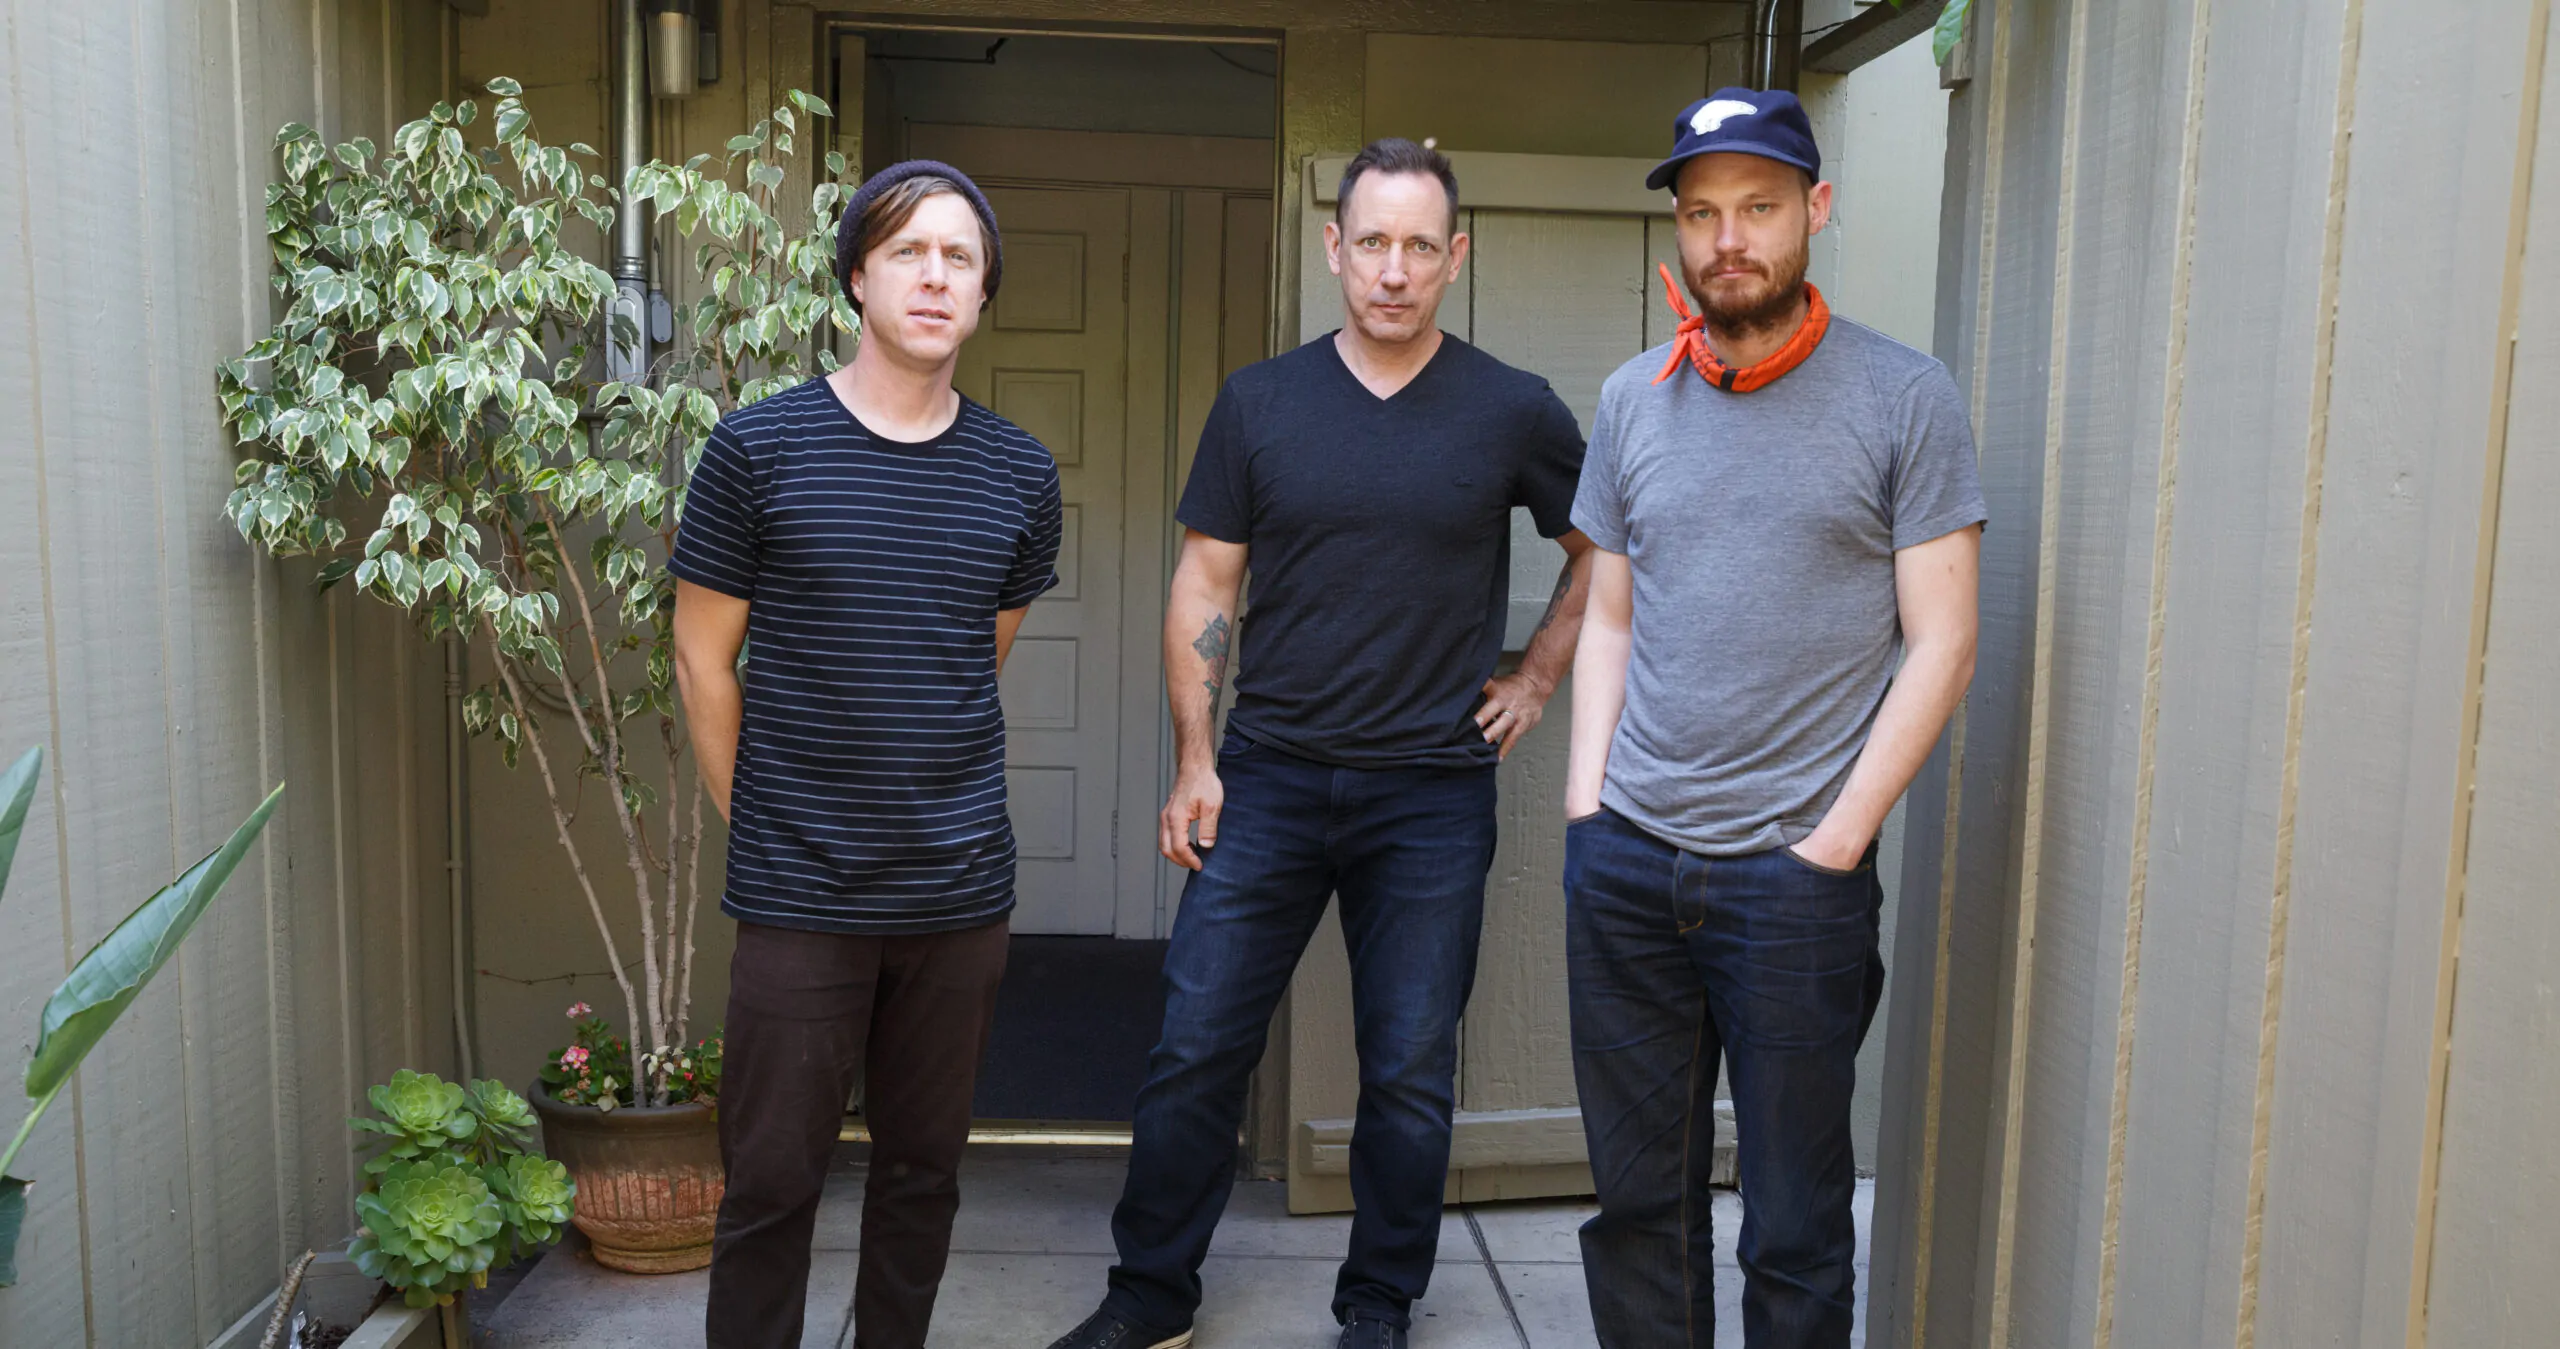 INTERVIEW: JIMMY CHAMBERLIN on his New Complex Album, Drumming and SMASHING PUMPKINS